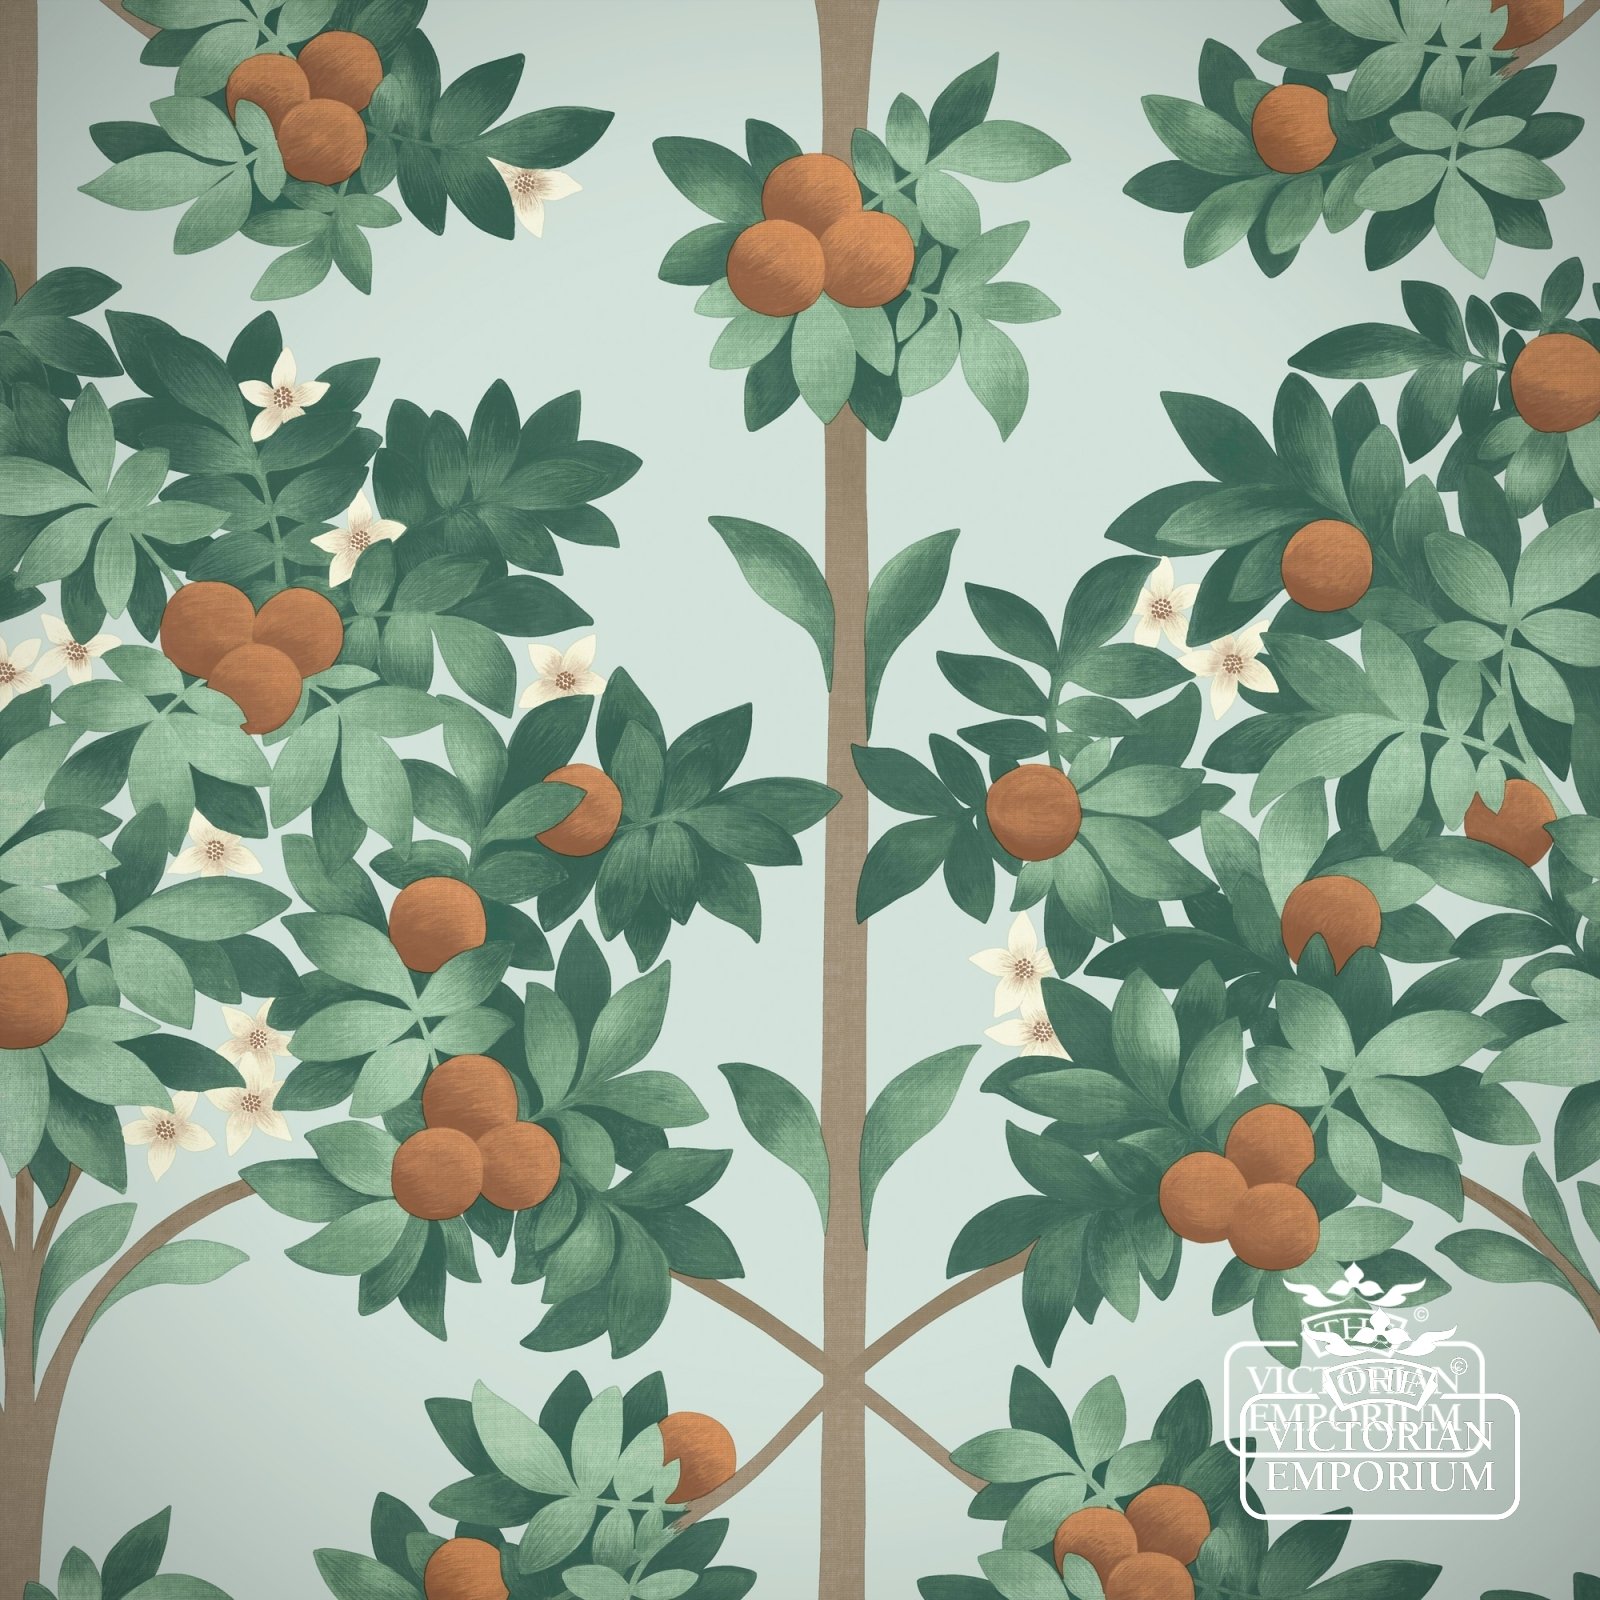 Orange Blossom wallpaper in a choice of 4 colourways